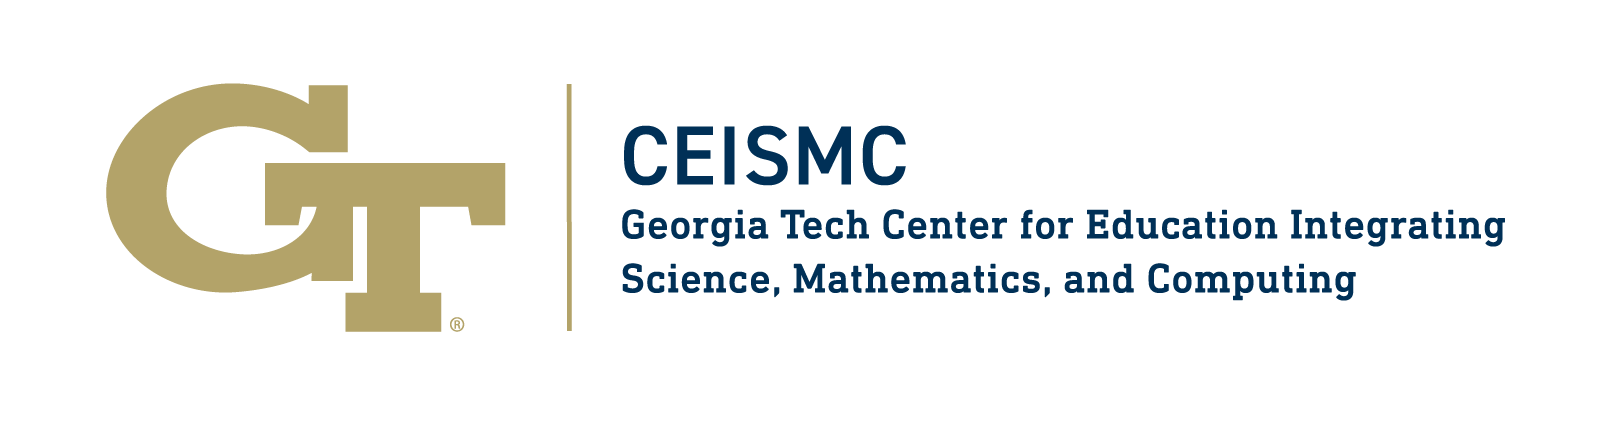 The letters G and T with CEISMC Georgia Tech Center for Education Integrating Science, Mathematics, and Computing written to the right of it